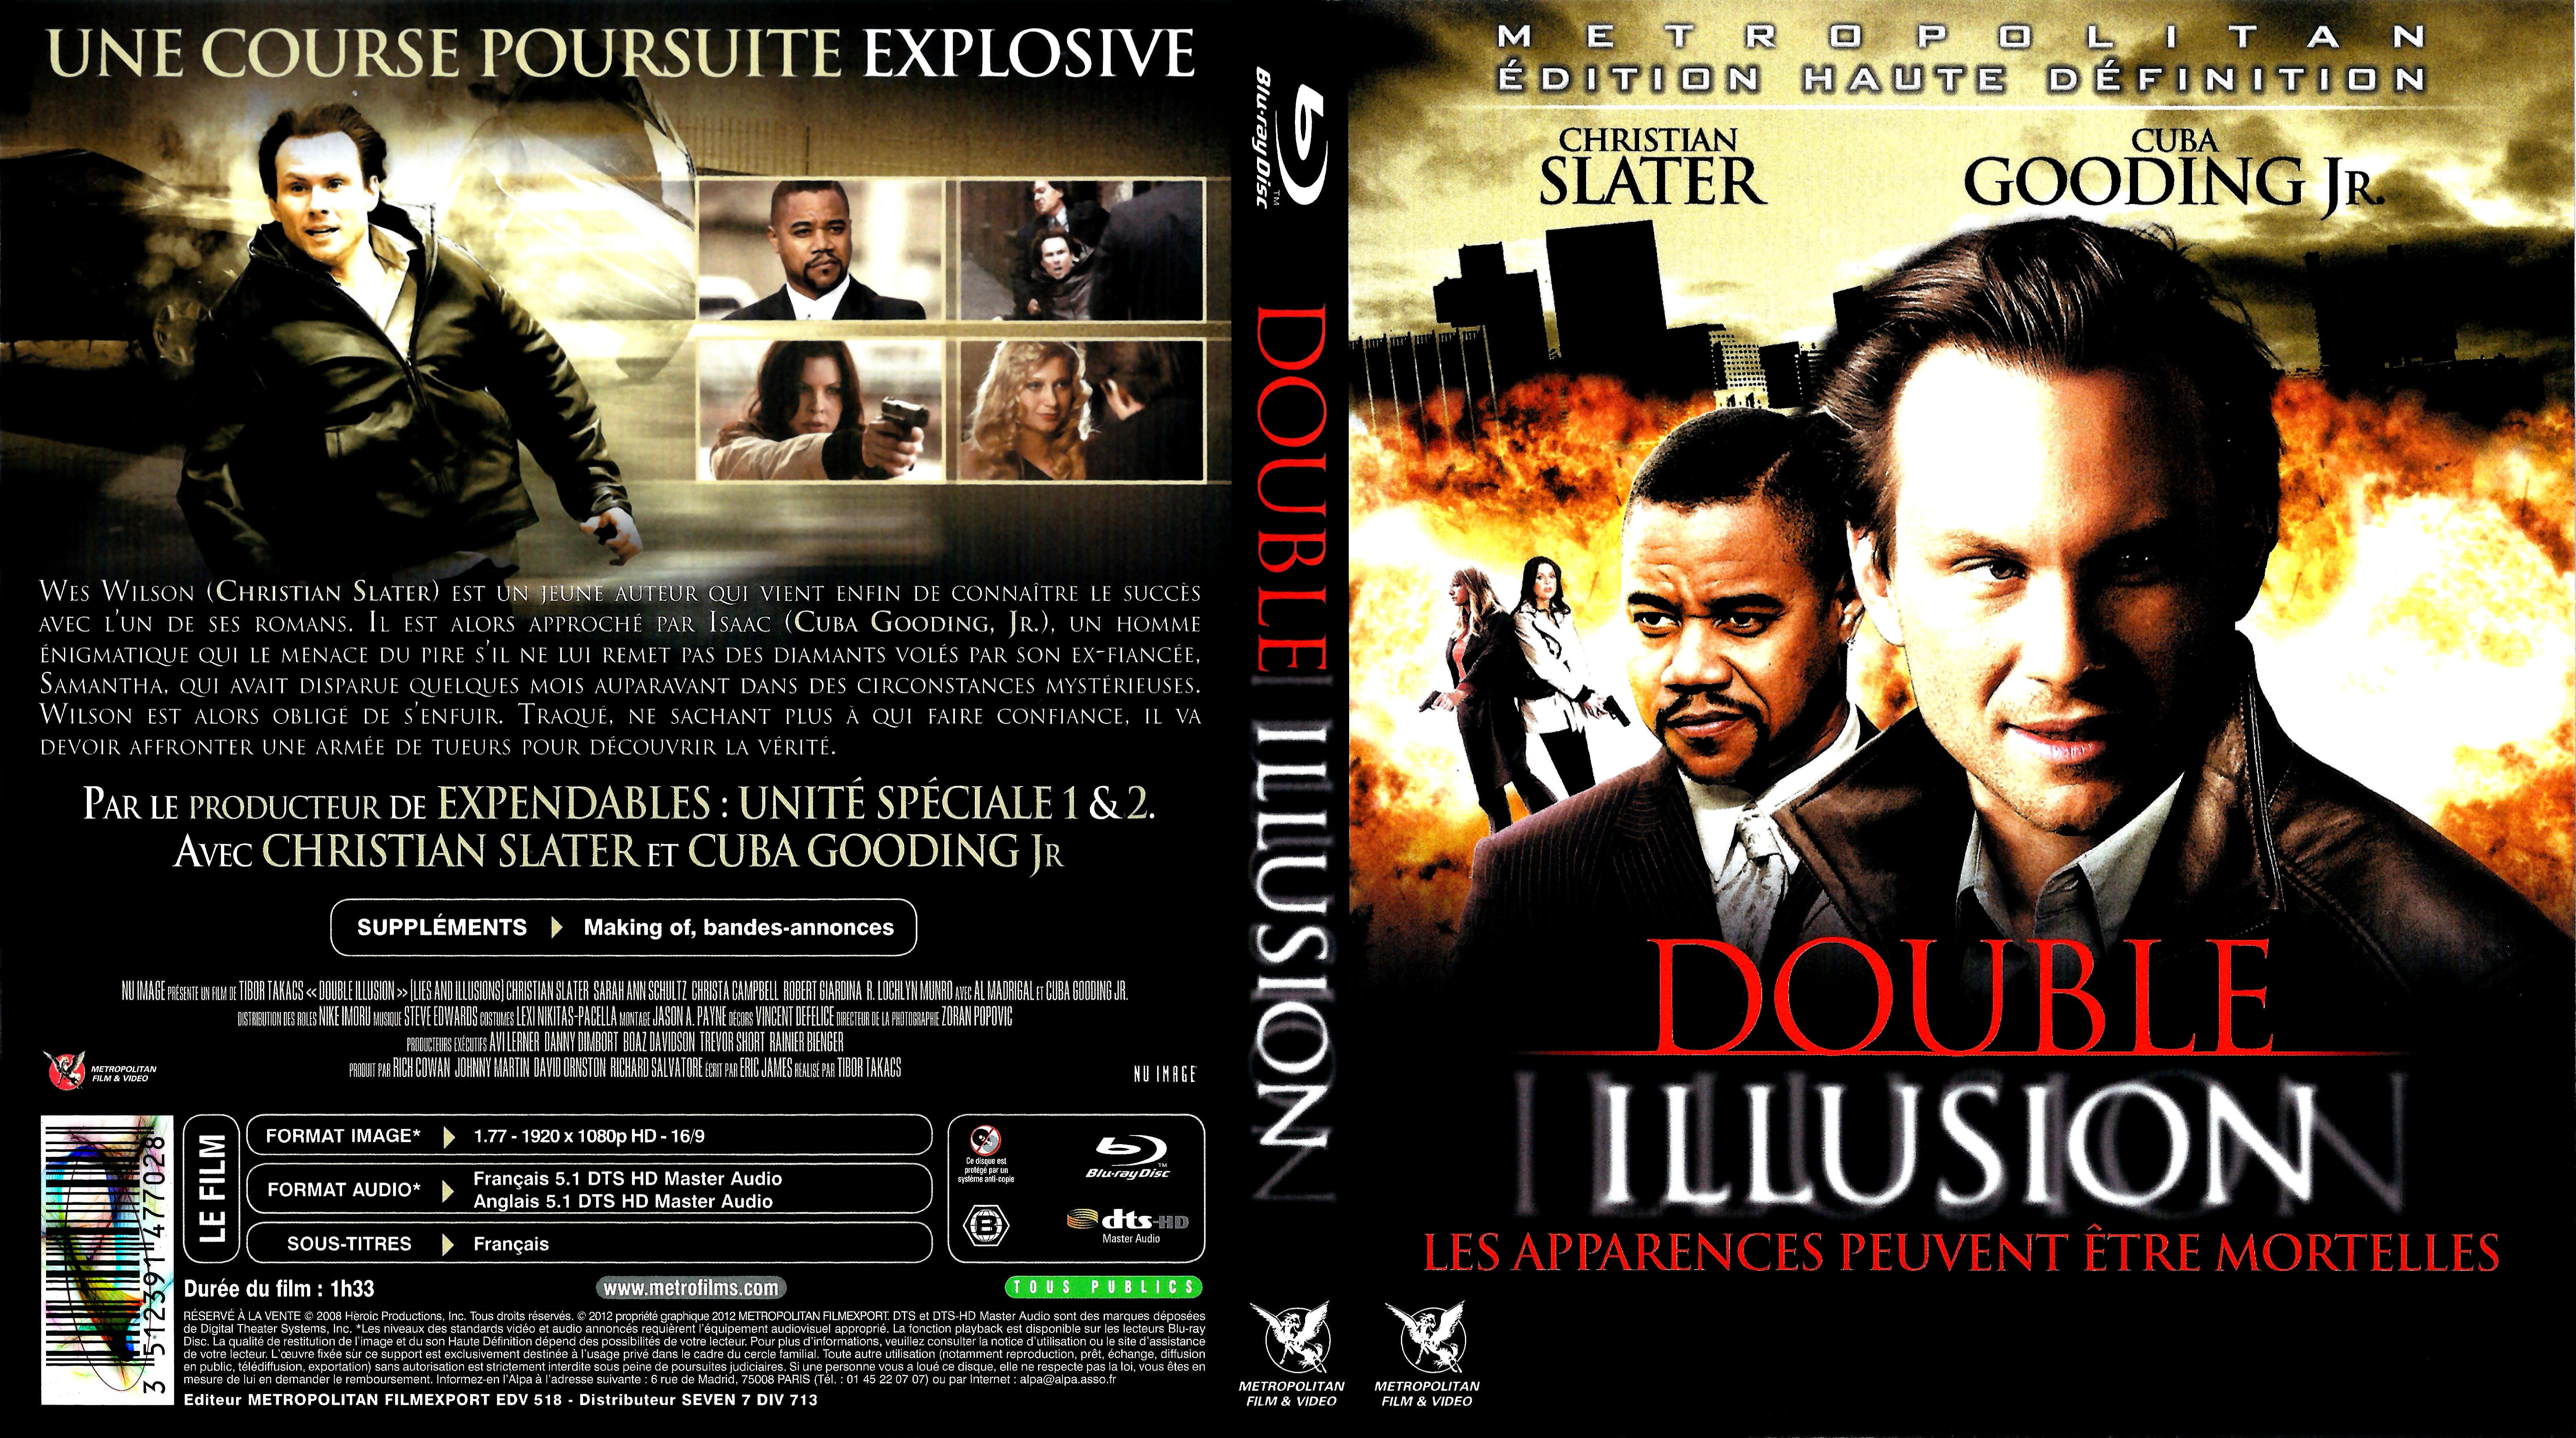 Jaquette DVD Double illusion (BLU-RAY)